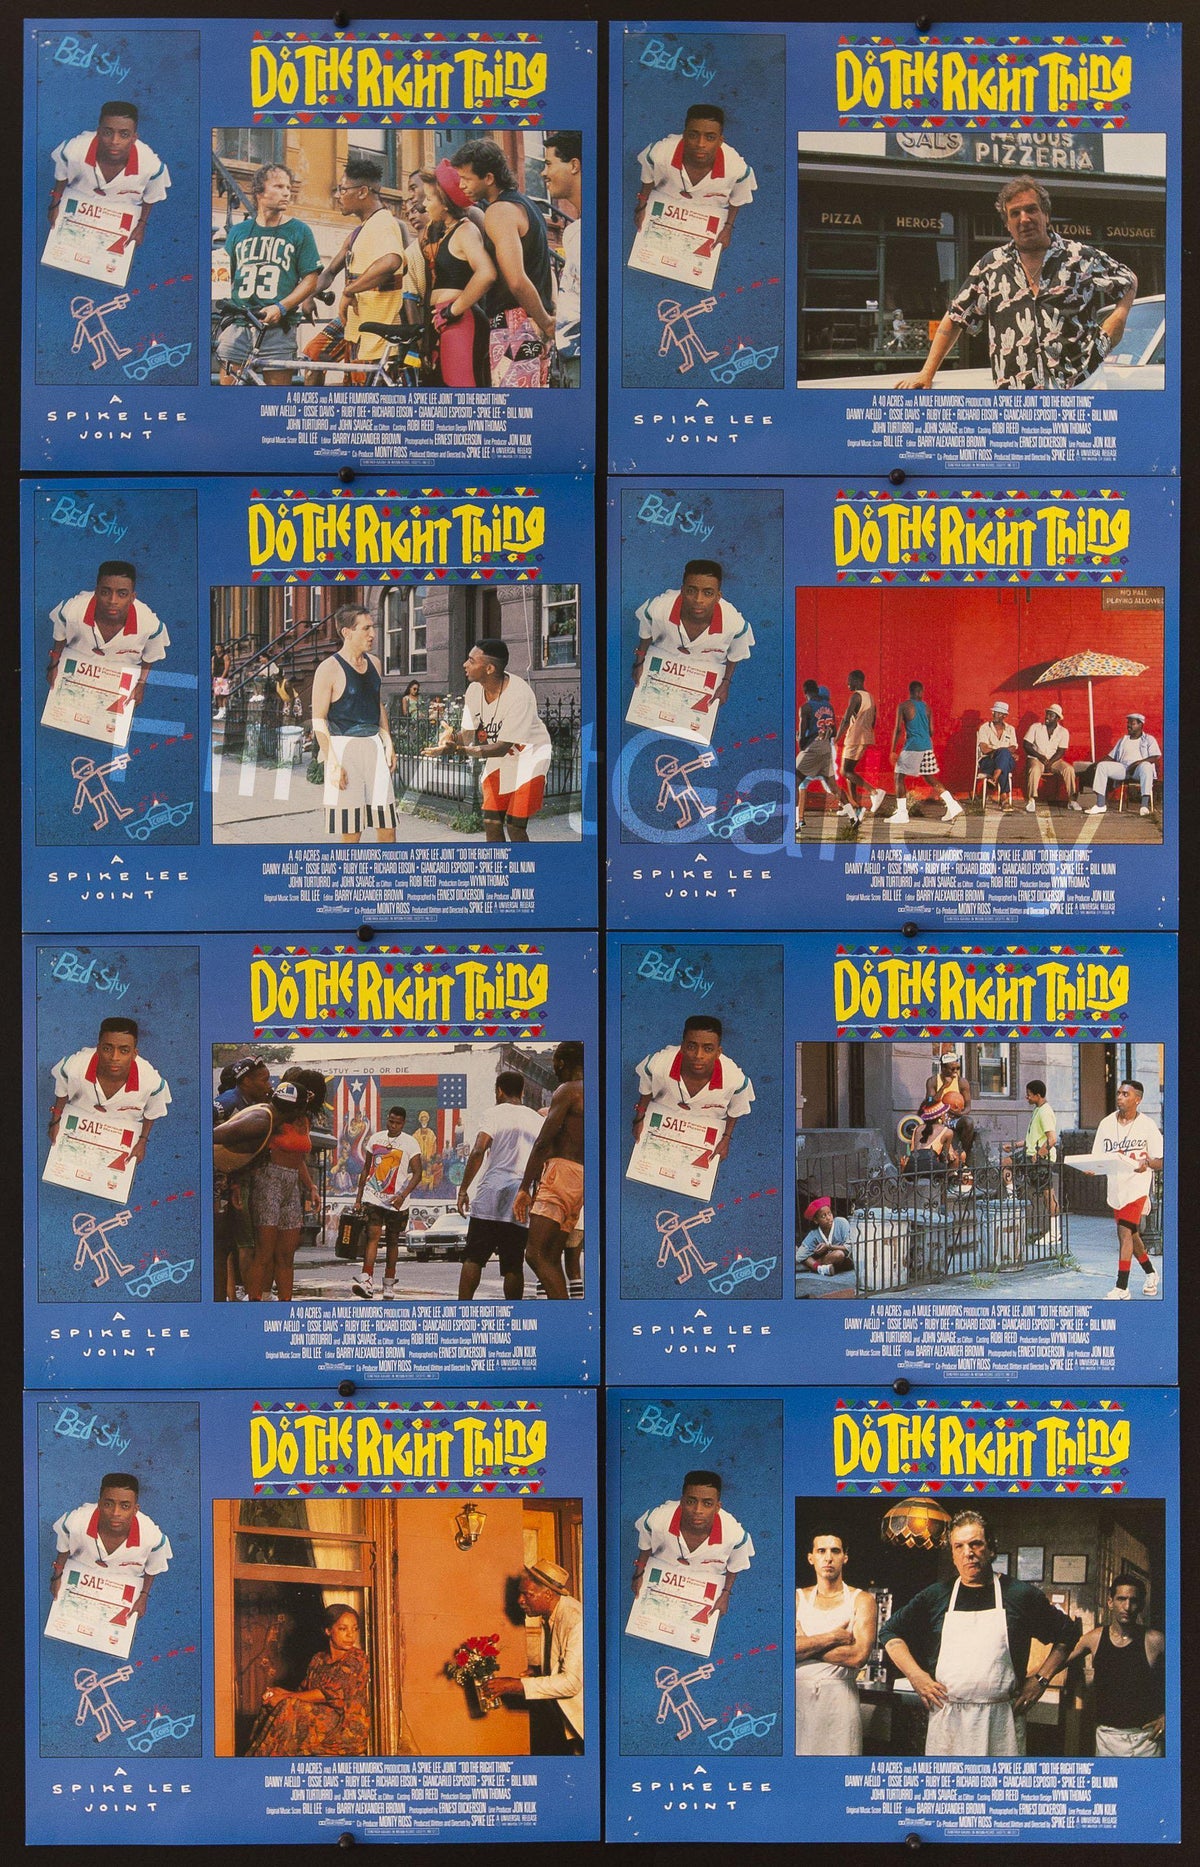 Do The Right Thing Lobby Card Set of 8 (11x14) Original Vintage Movie Poster